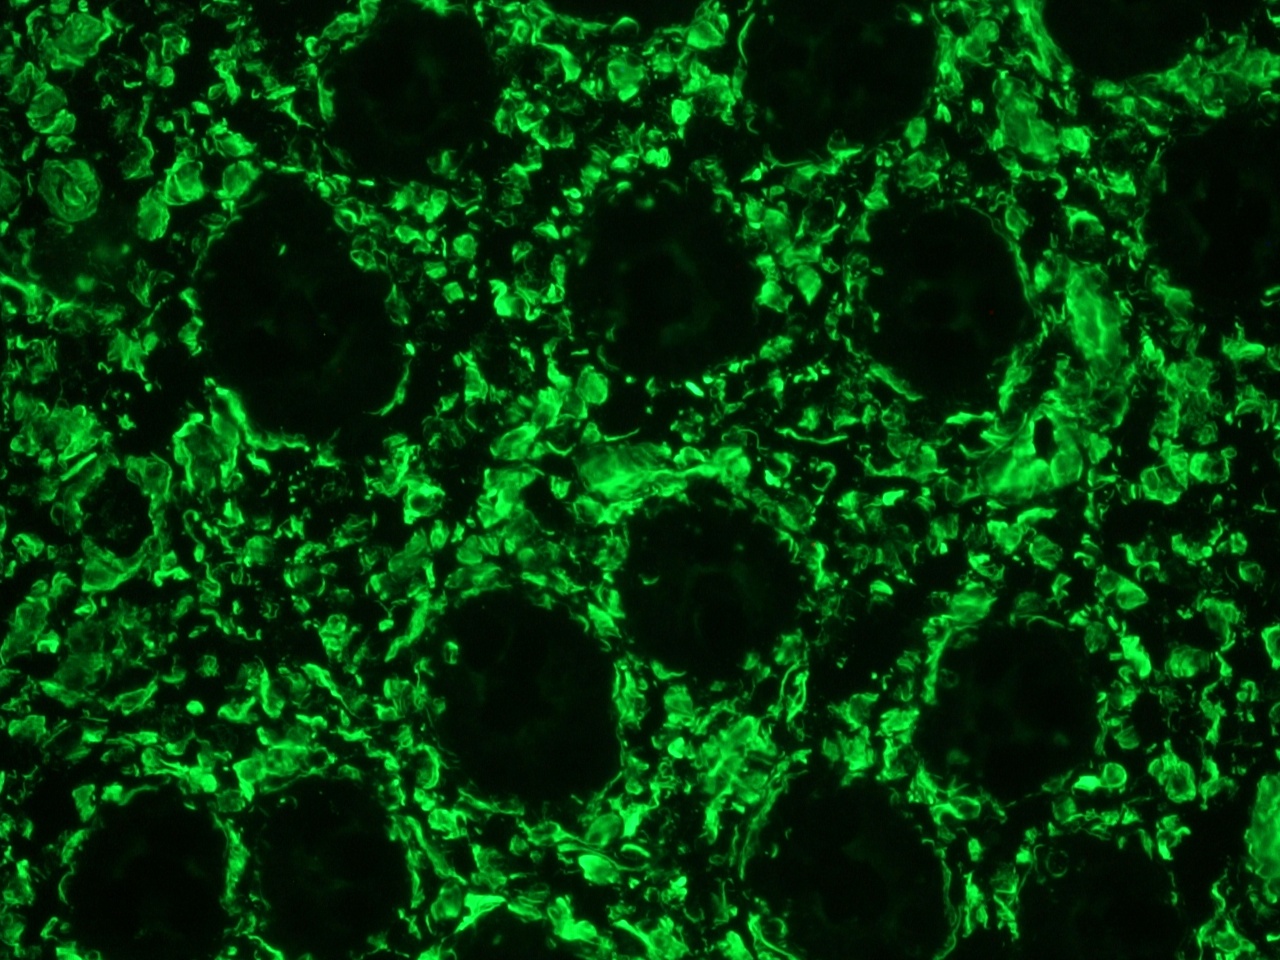 Immunofluorescence staining of frozen section of human colon using MUB1900L1. Note reactivity in connective tissue while epithelial cells remain negative.